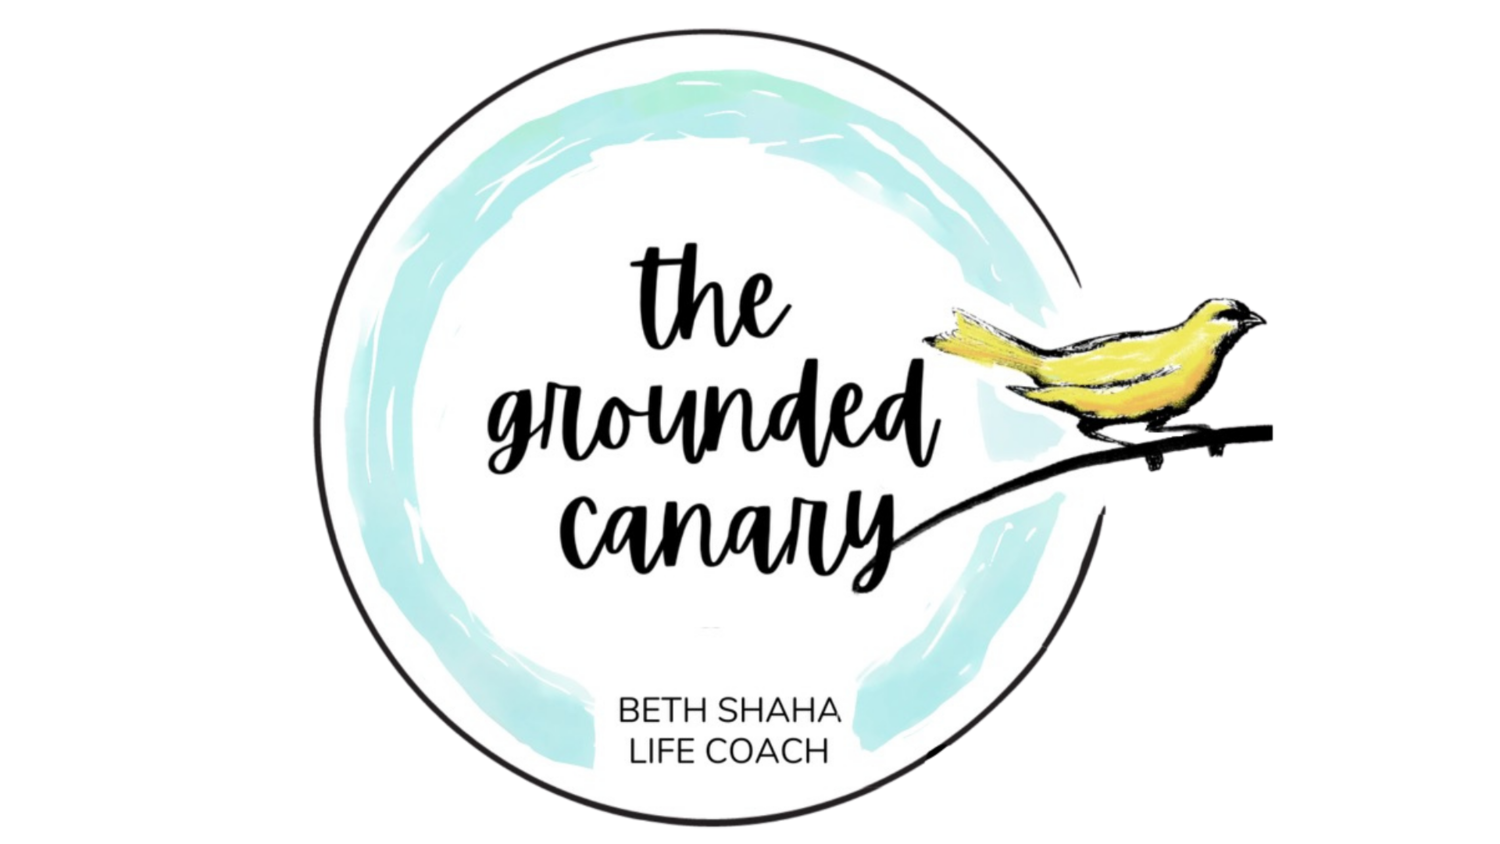 The Grounded Canary